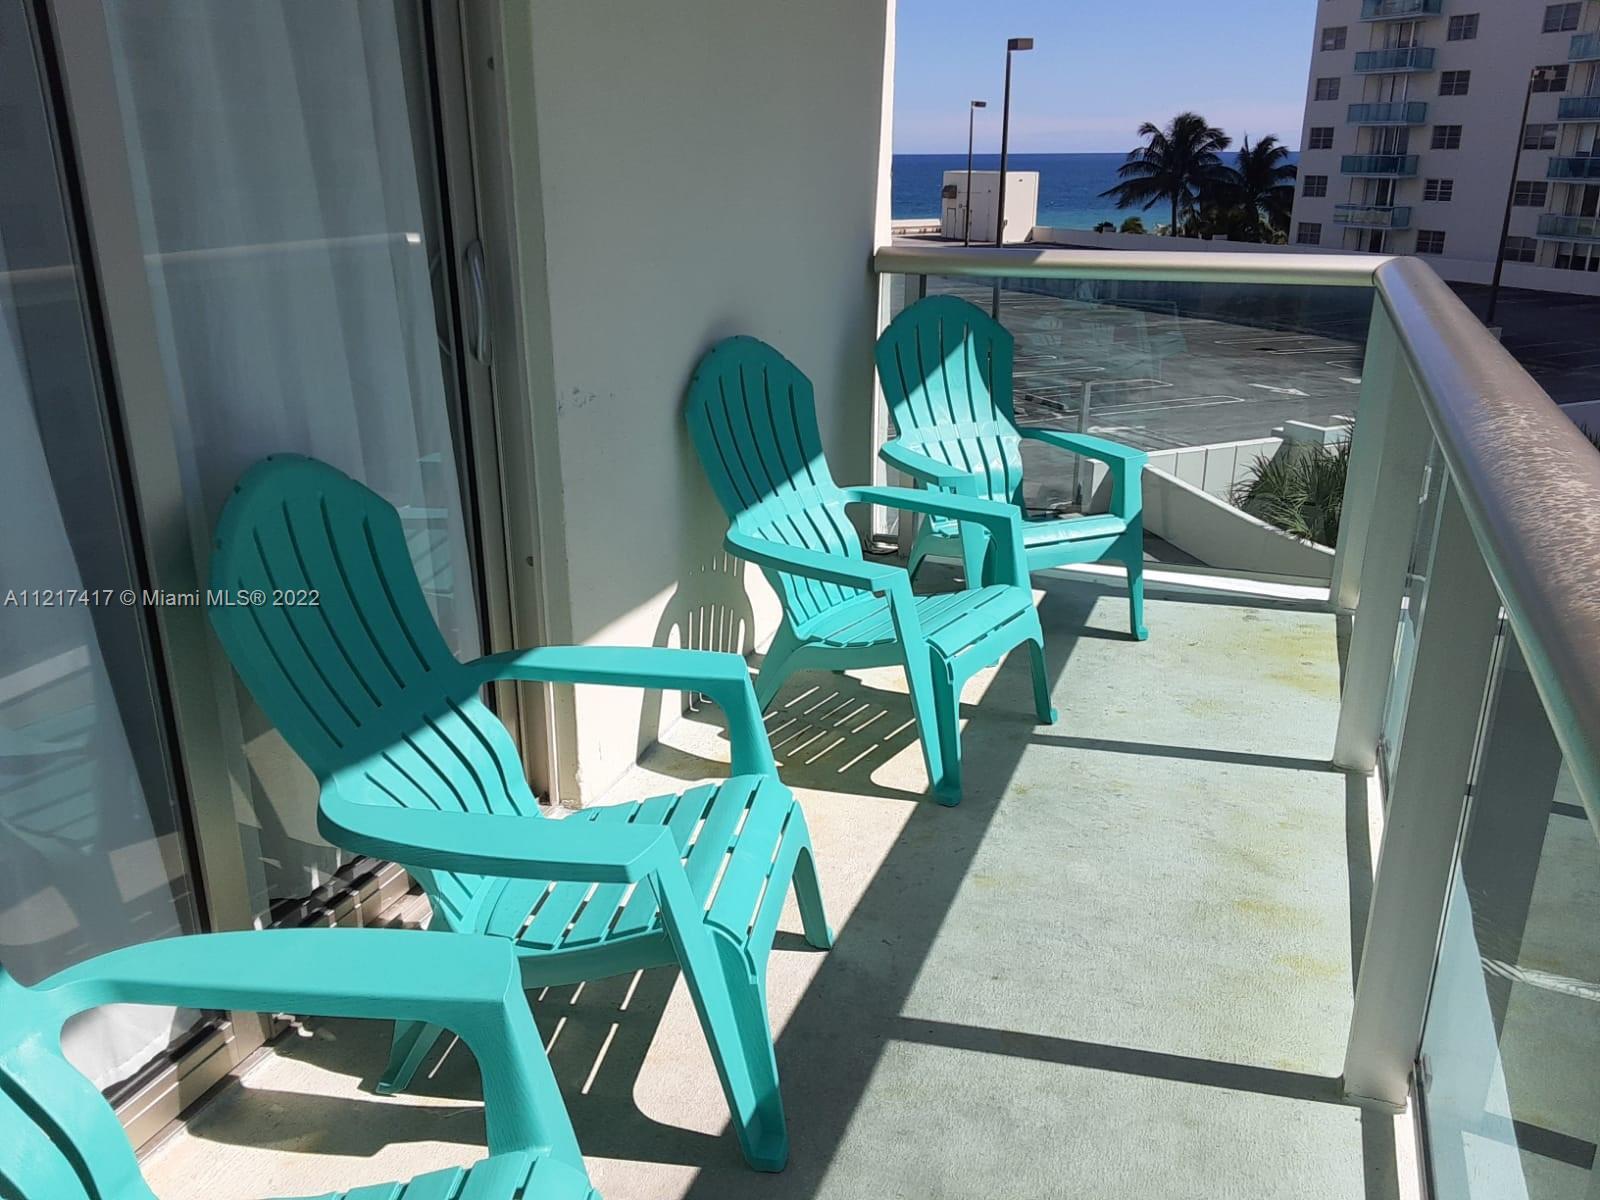 Spacious 2/2 beach apartment.  Renovated kitchen. Large window view to the city.  Bedroom views to t